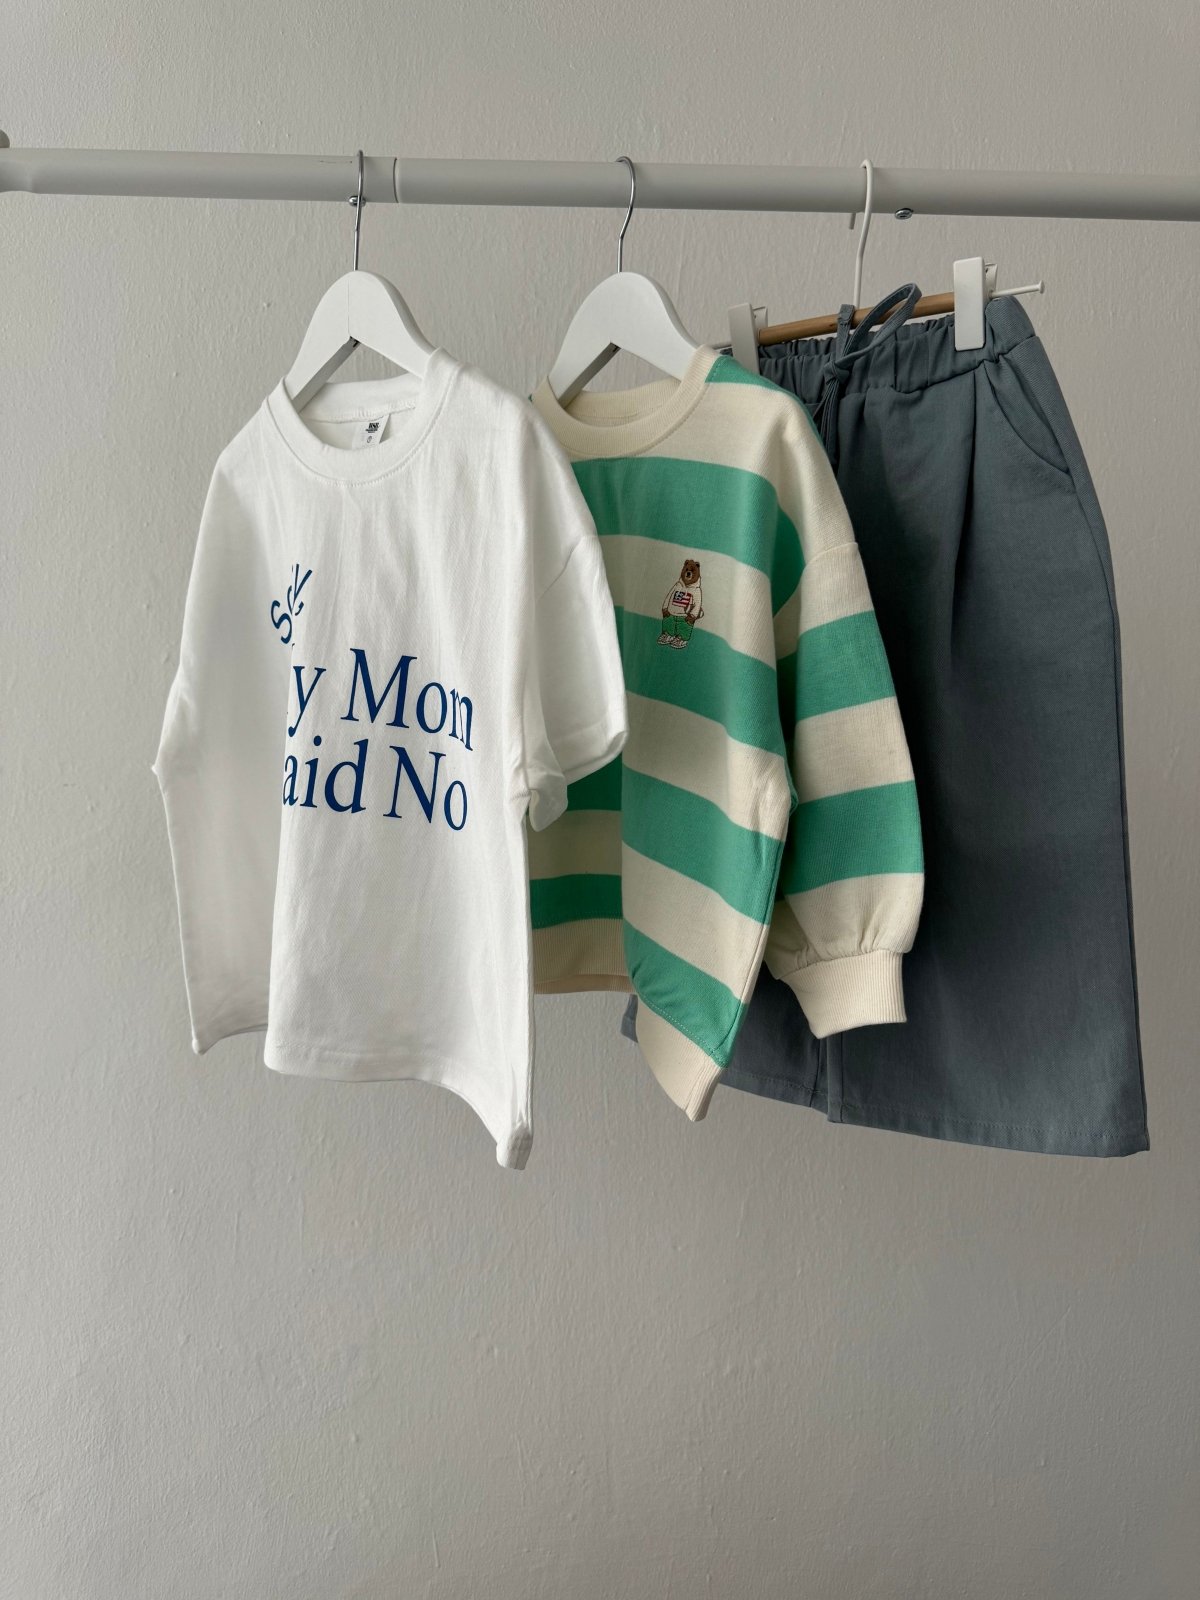 Big Stripe Embroidery Sweatshirt find Stylish Fashion for Little People- at Little Foxx Concept Store